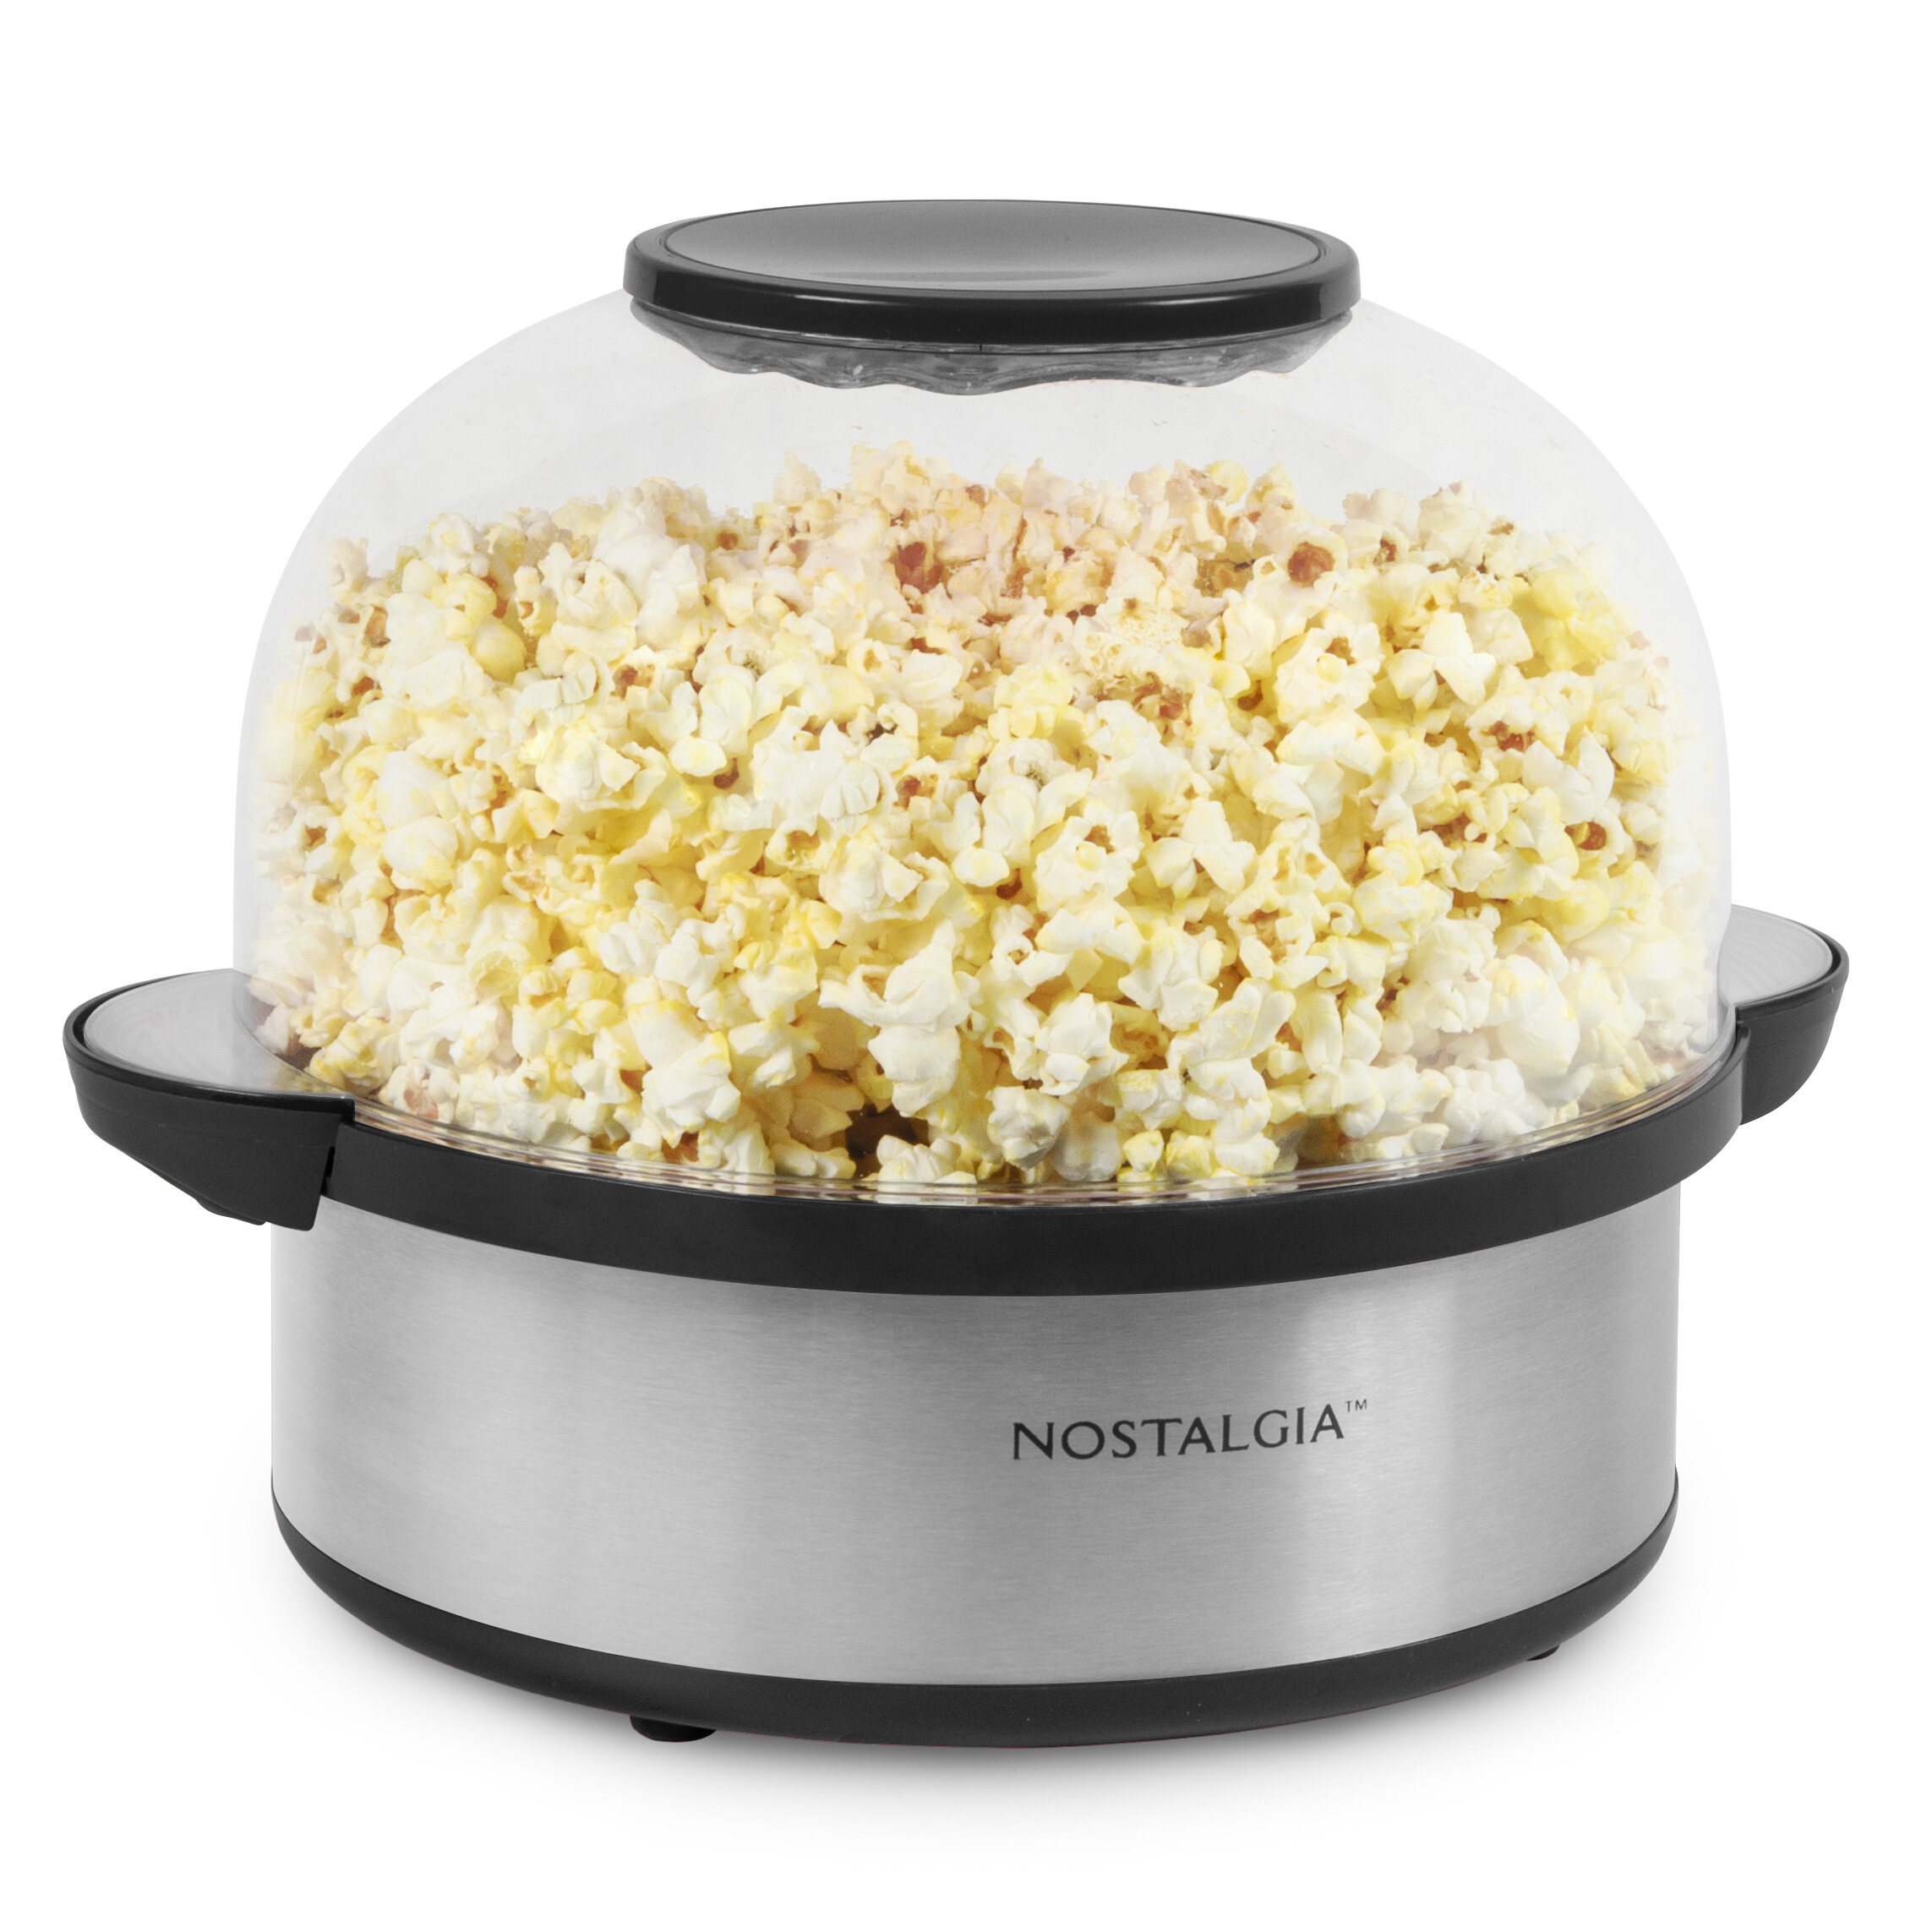 West Bend Theater Crazy Stirring Oil Popcorn Maker with Non-Stick